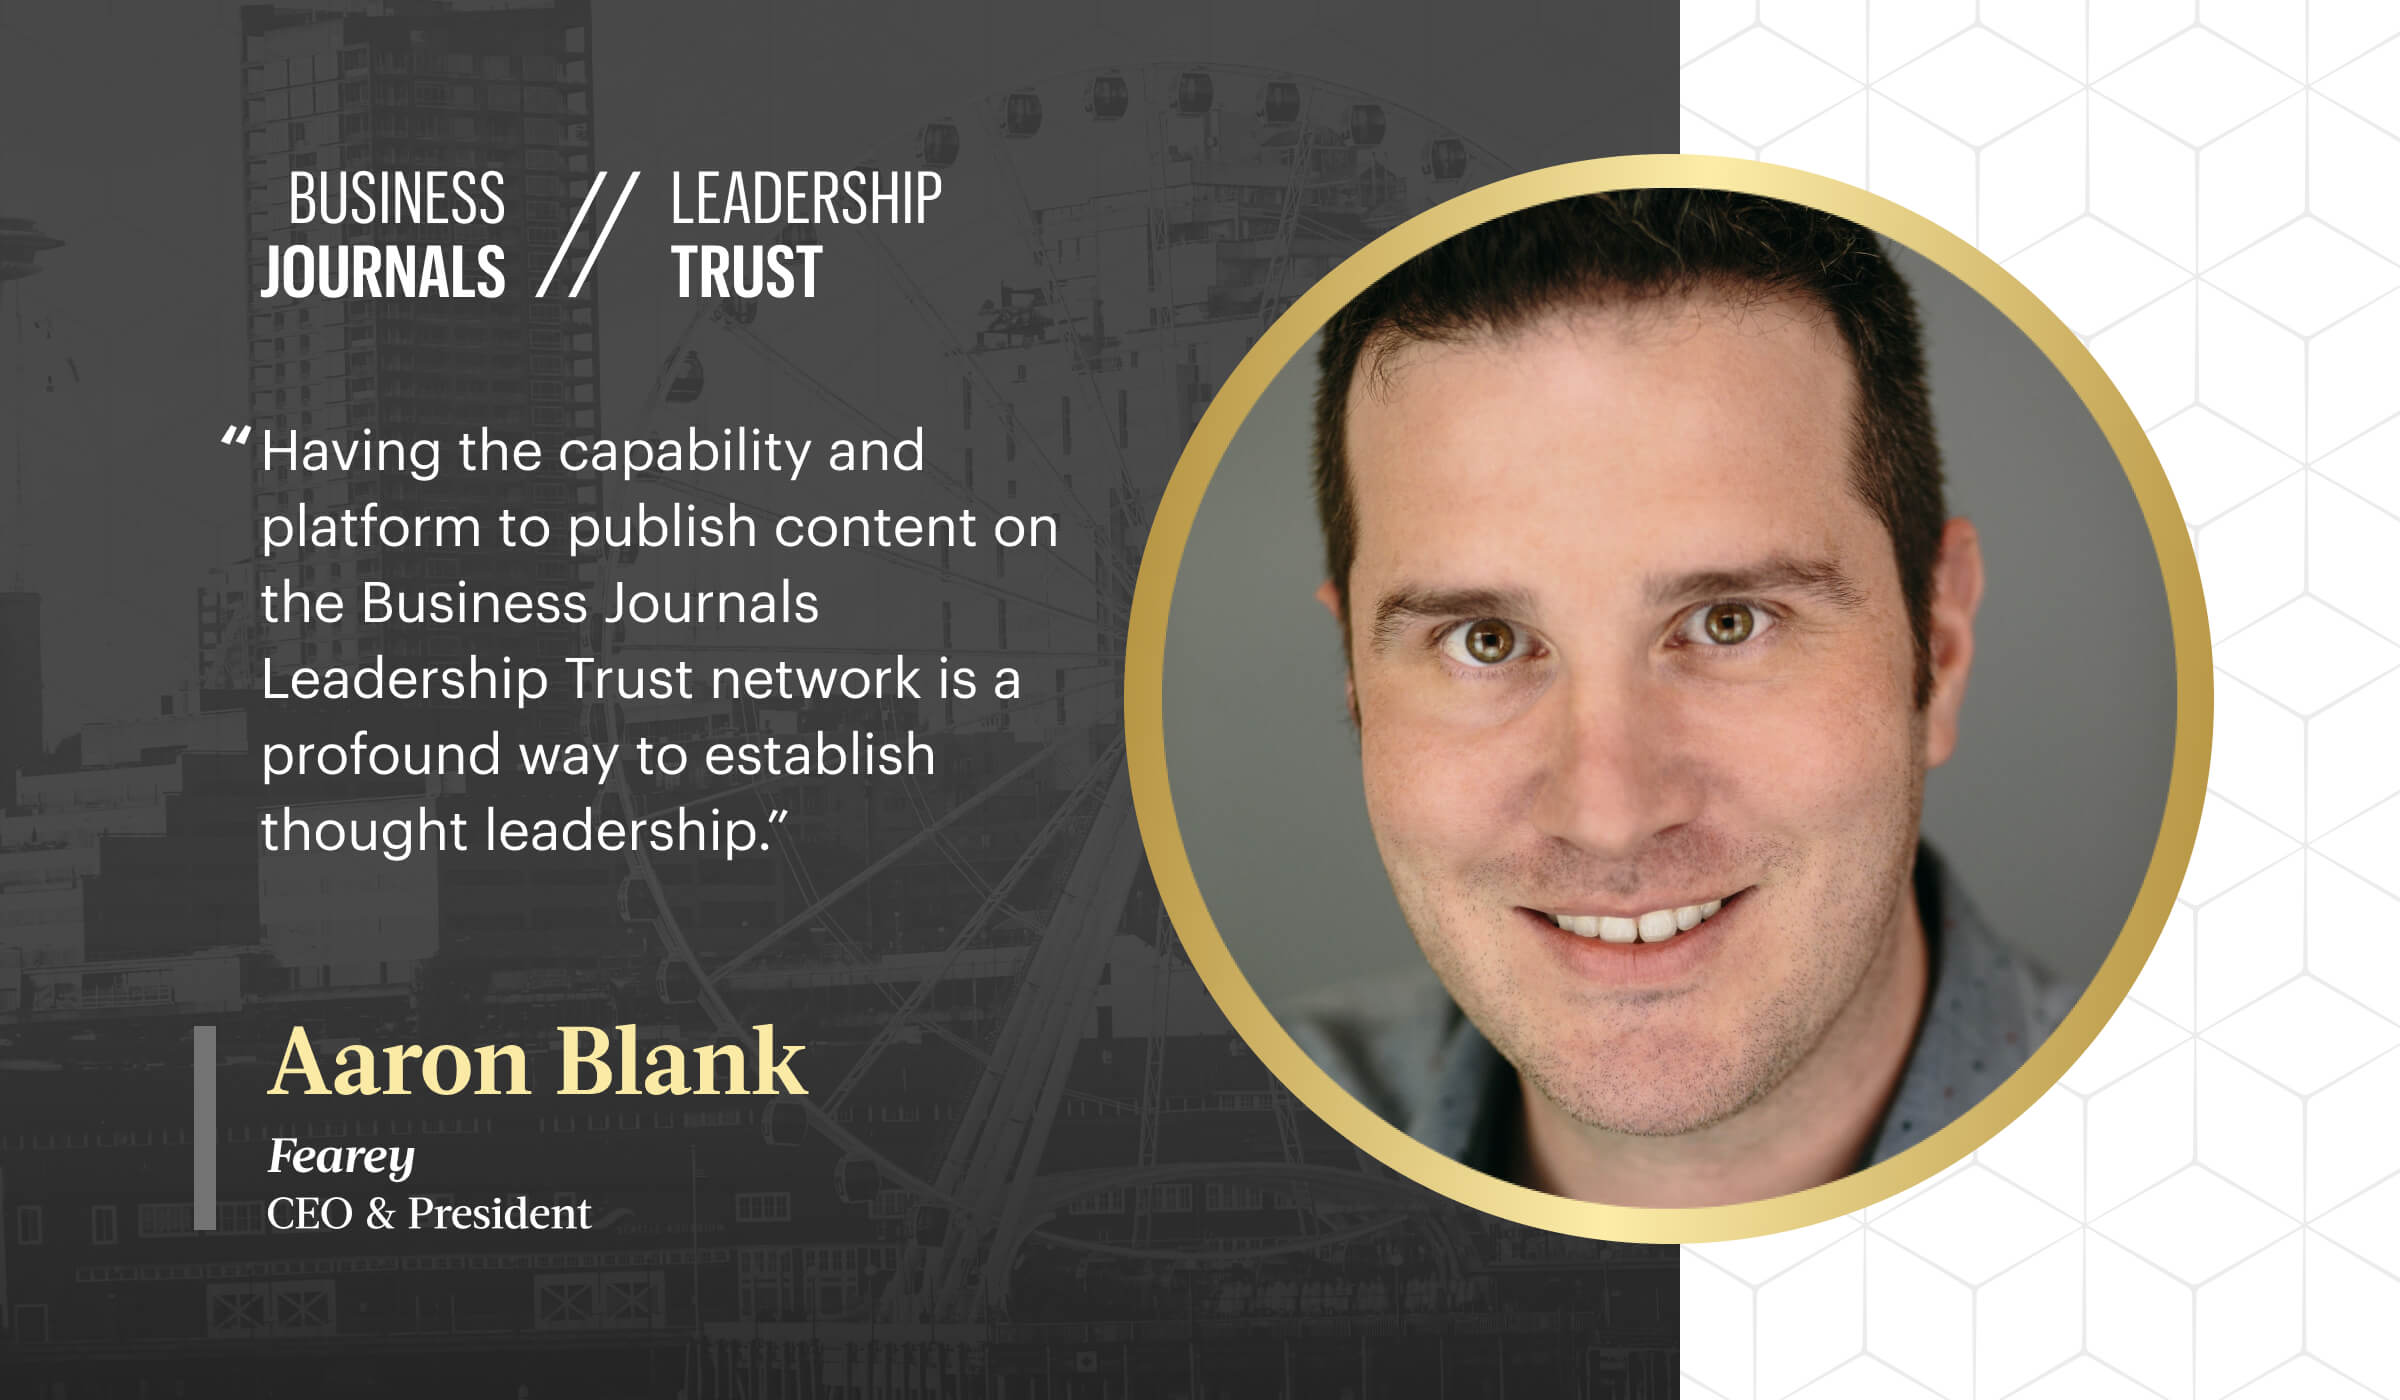 For Aaron Blank, Business Journals Leadership Trust Provides a Vehicle for Thought Leadership and Valuable Connections